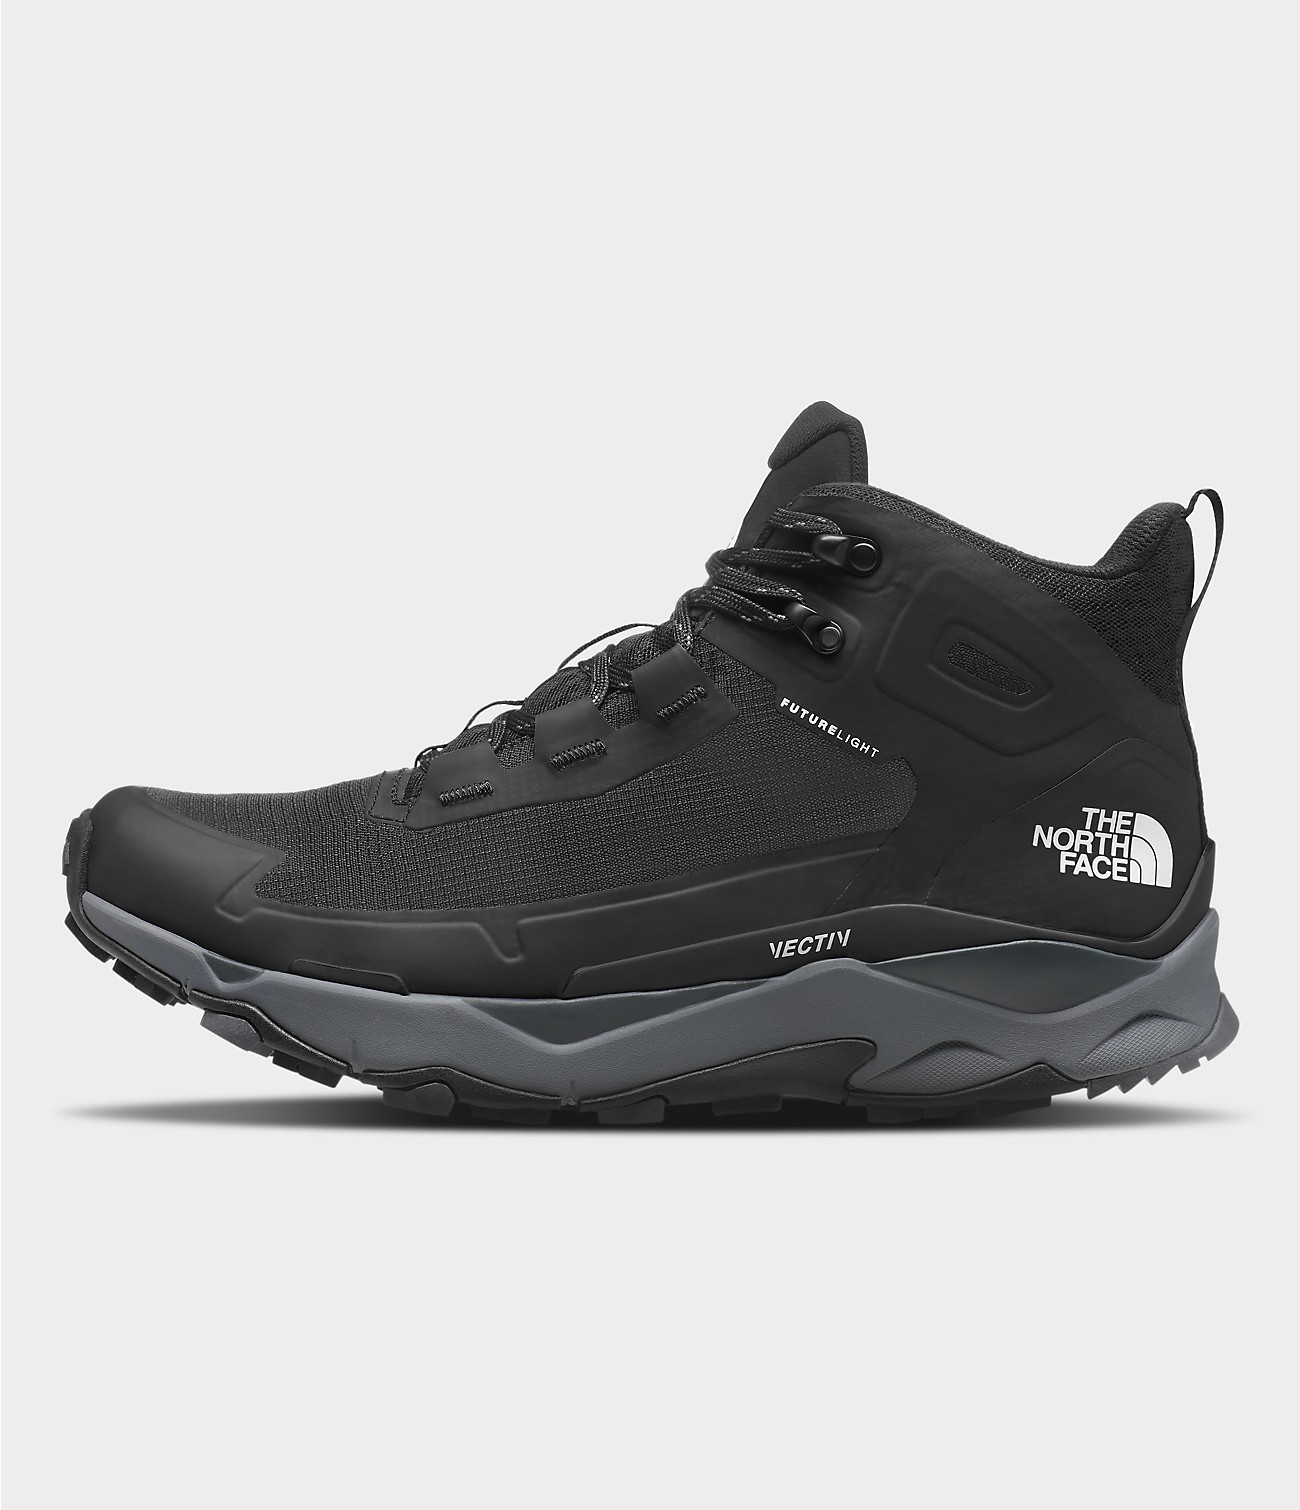 Men's Winter & Snow Boots | The North Face